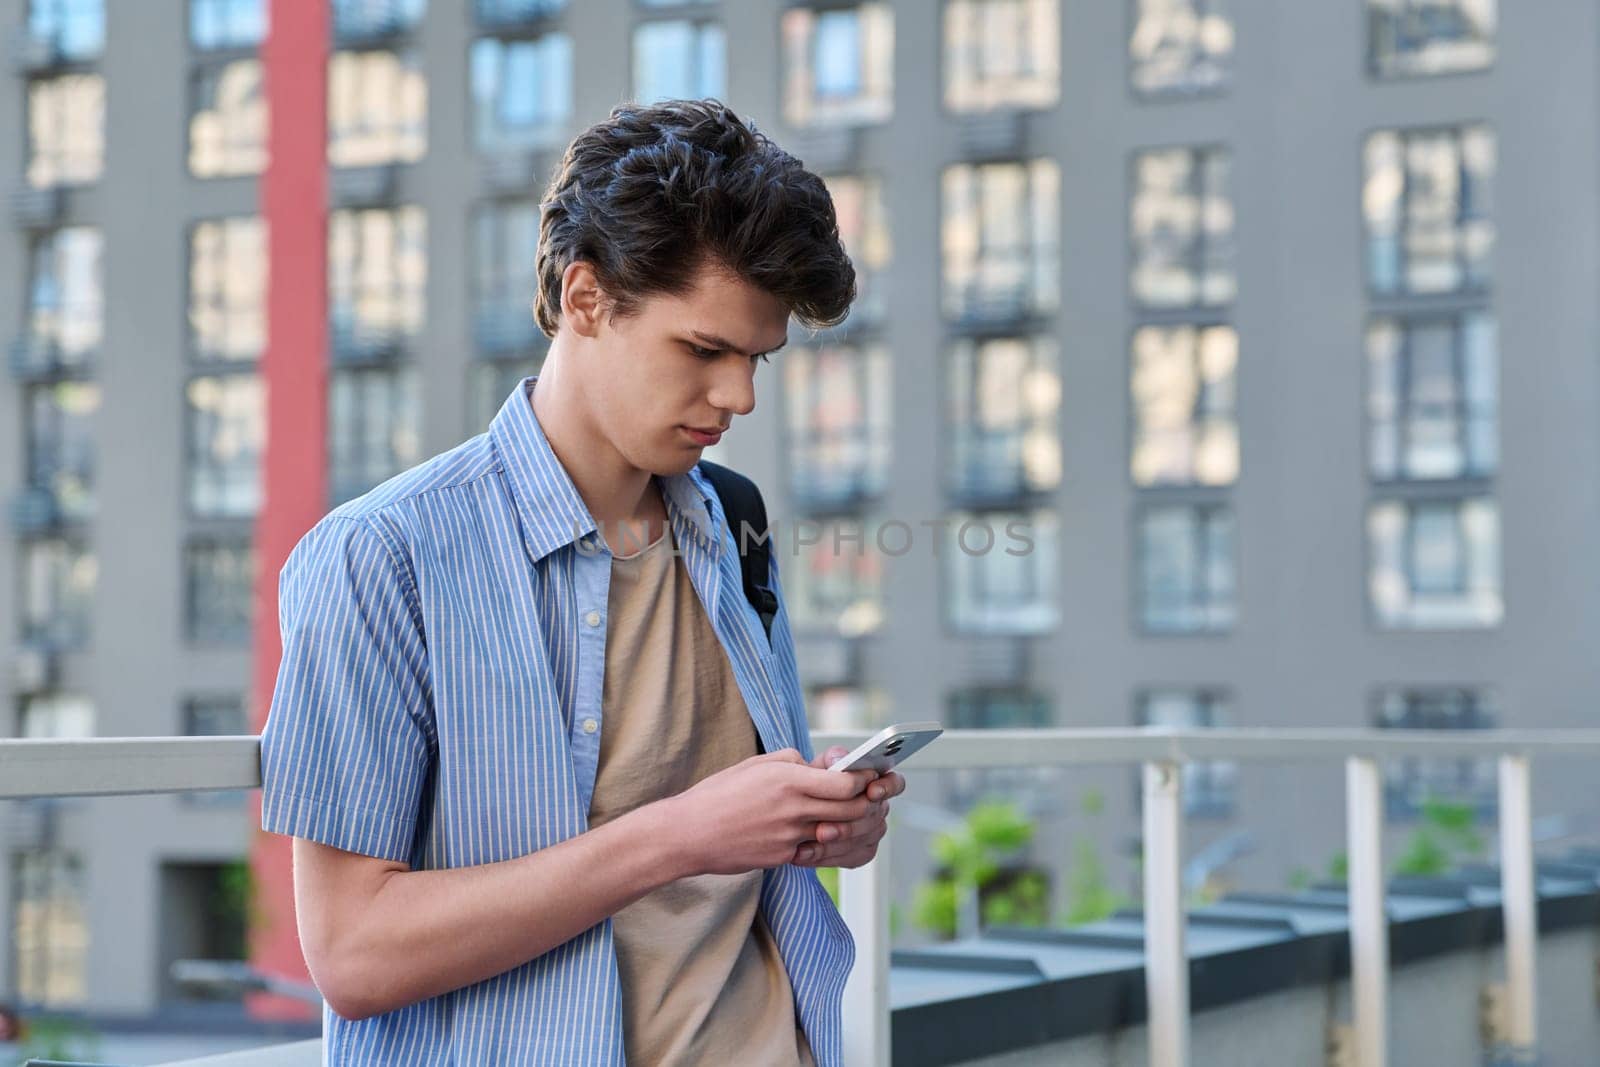 Relaxed resting handsome young male with smartphone, urban outdoor, modern building background. Student 19-20 years old using phone, texting, lifestyle, youth concept